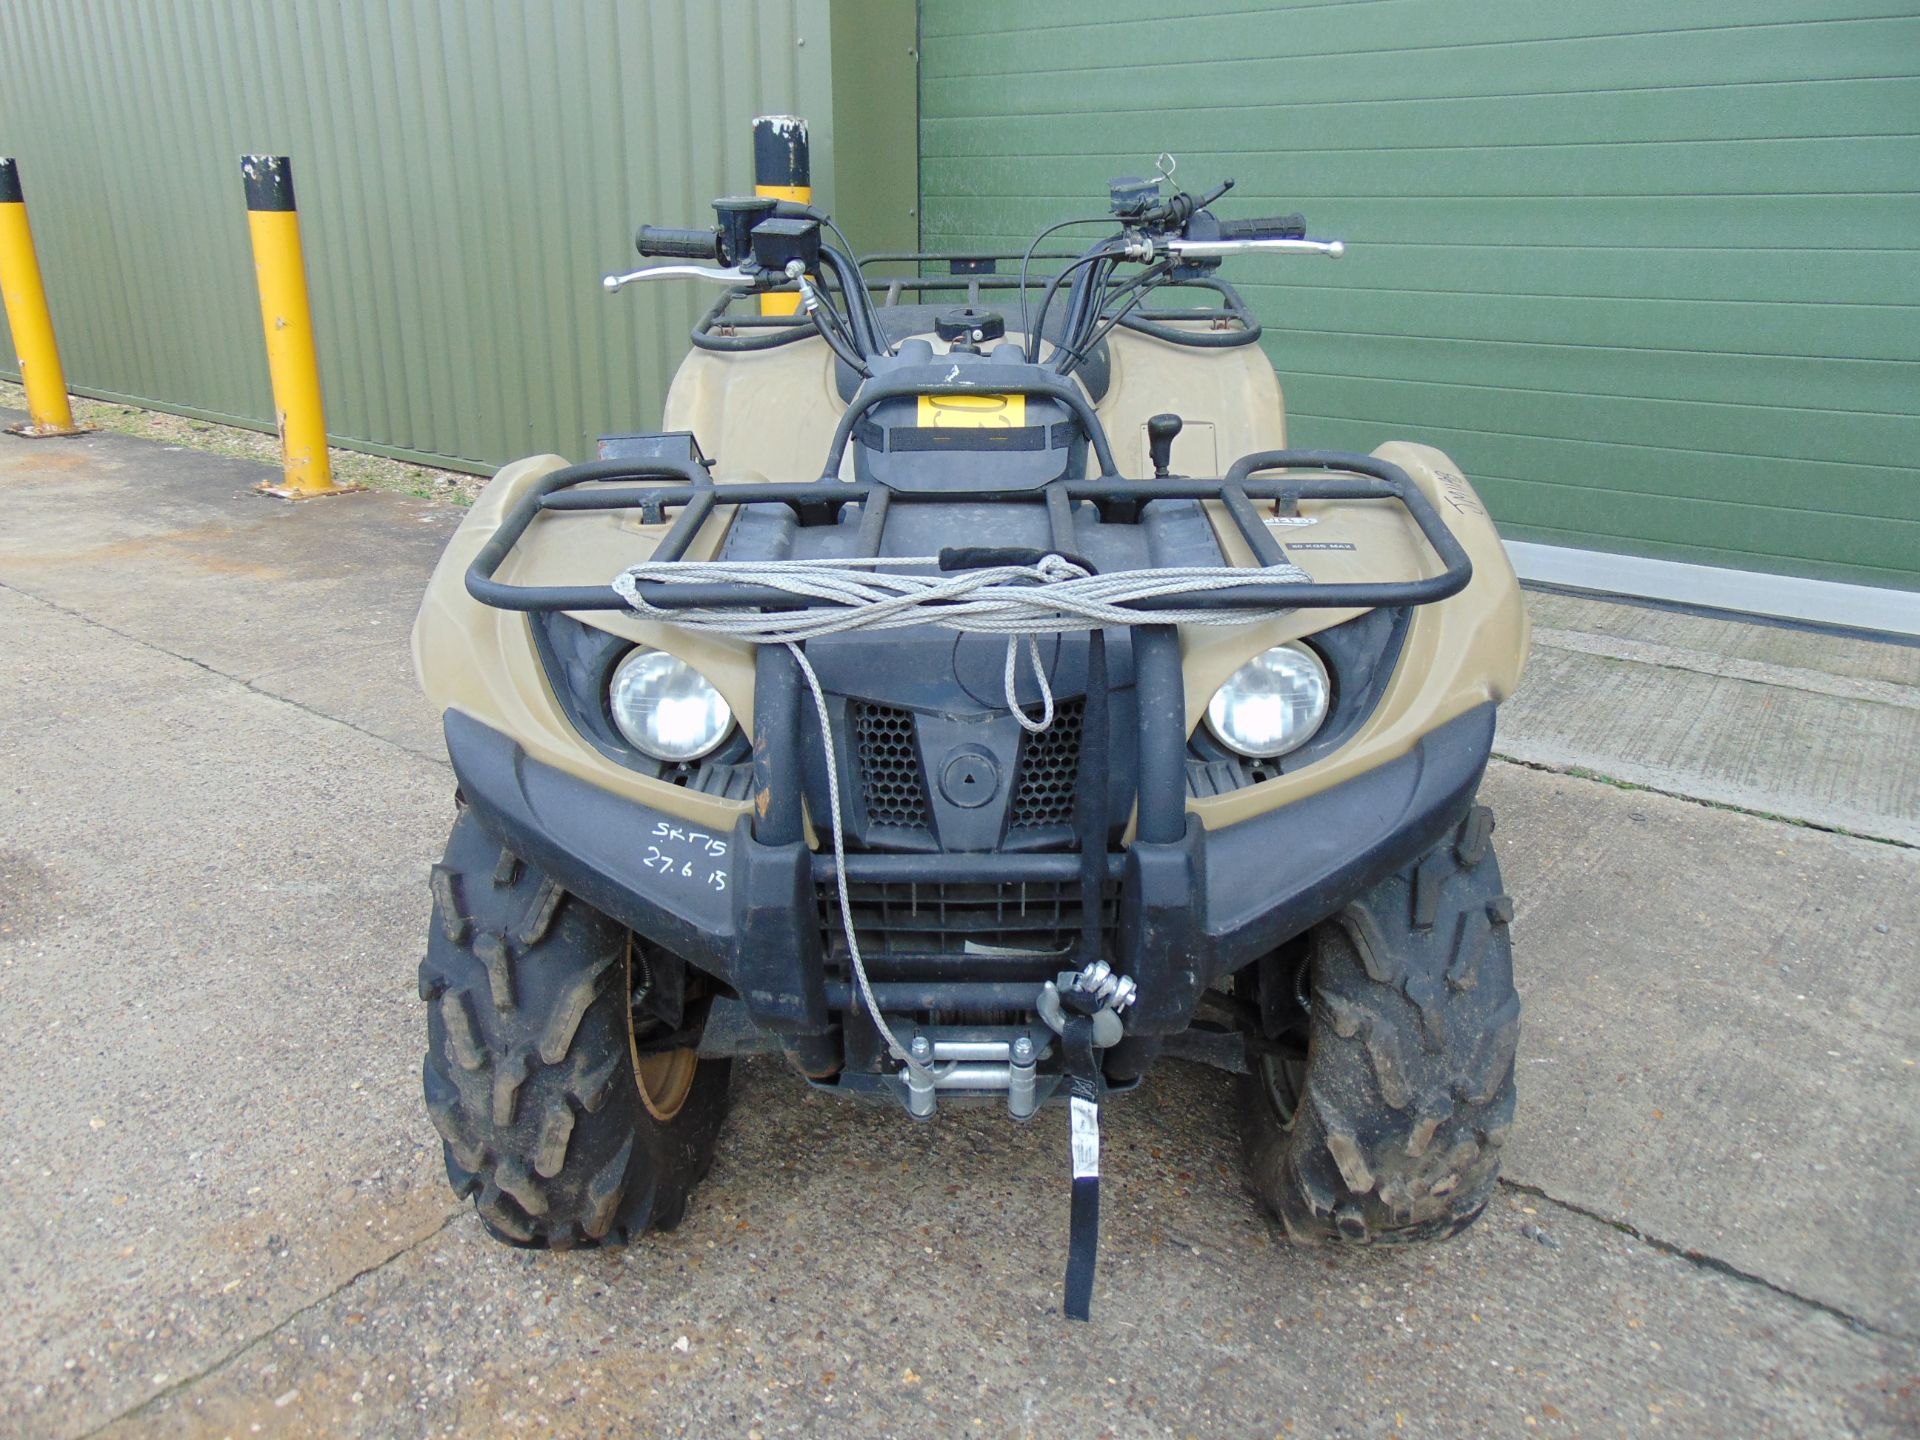 Military Specification Yamaha Grizzly 450 4 x 4 ATV Quad Bike Complete with Winch ONLY 591 HOURS! - Image 2 of 16